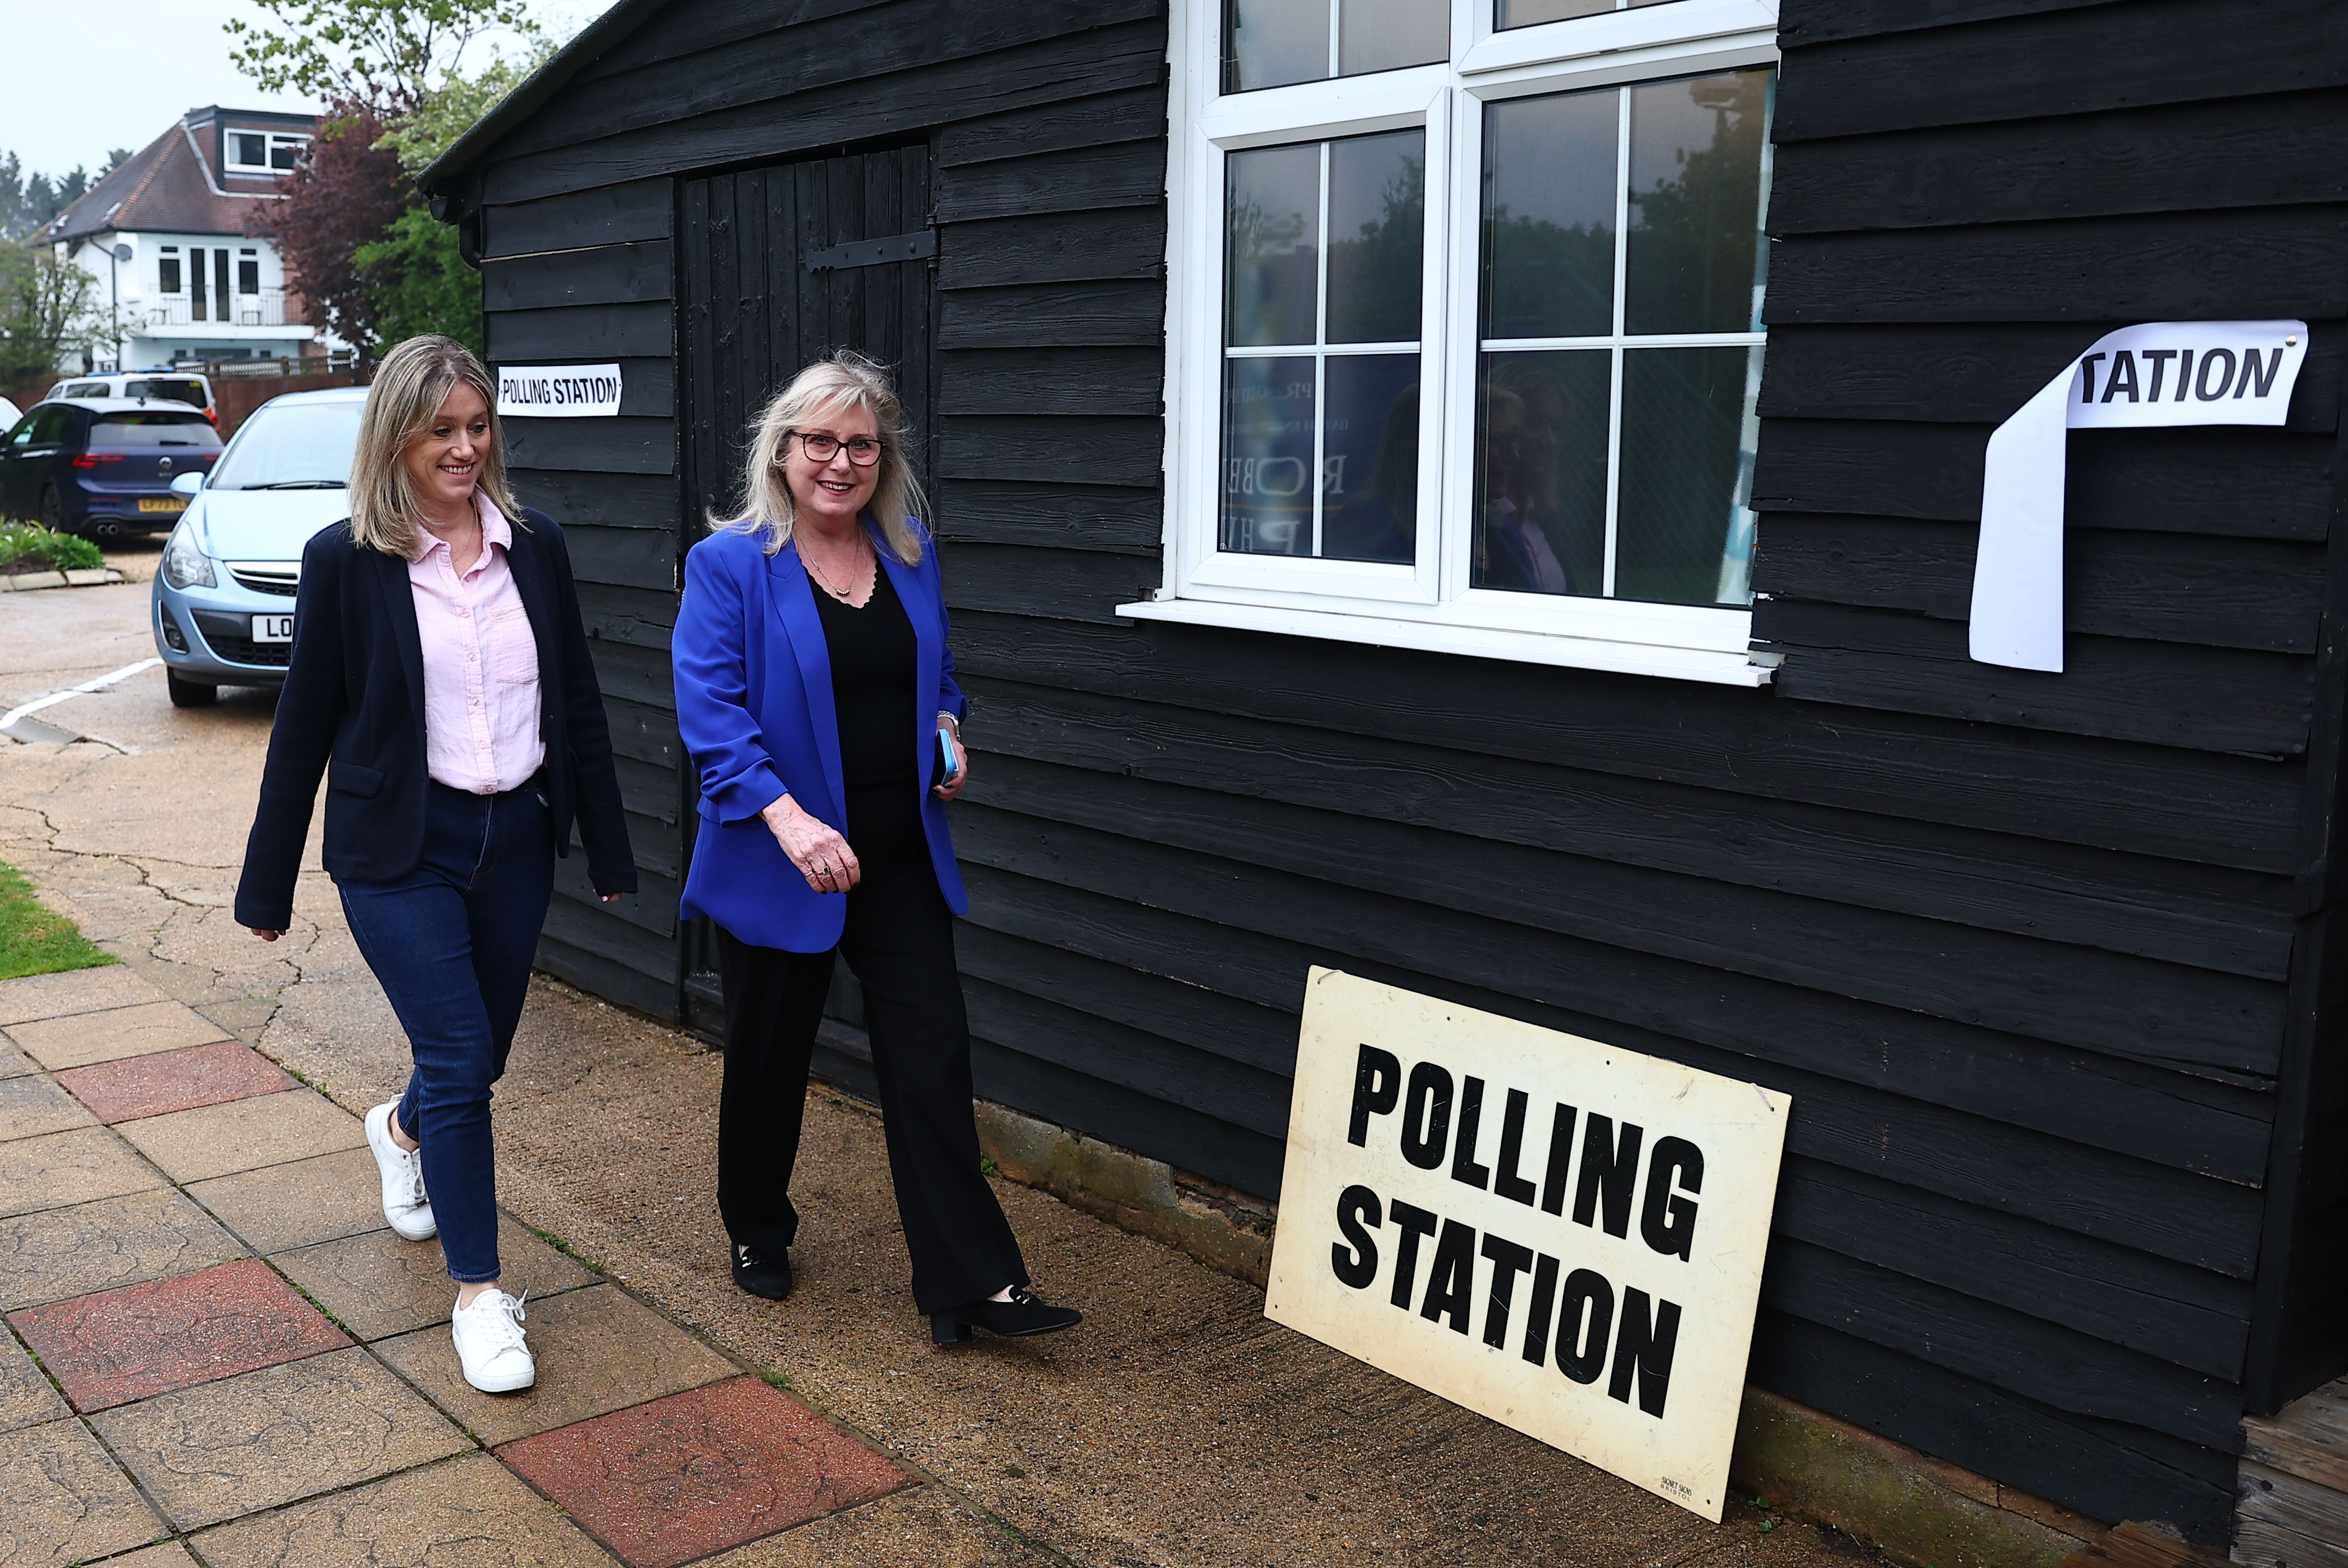 Susan Hall, Conservative Mayoral Candidate arrives with her daughter Louise Staite, at a polling station in Hatch End